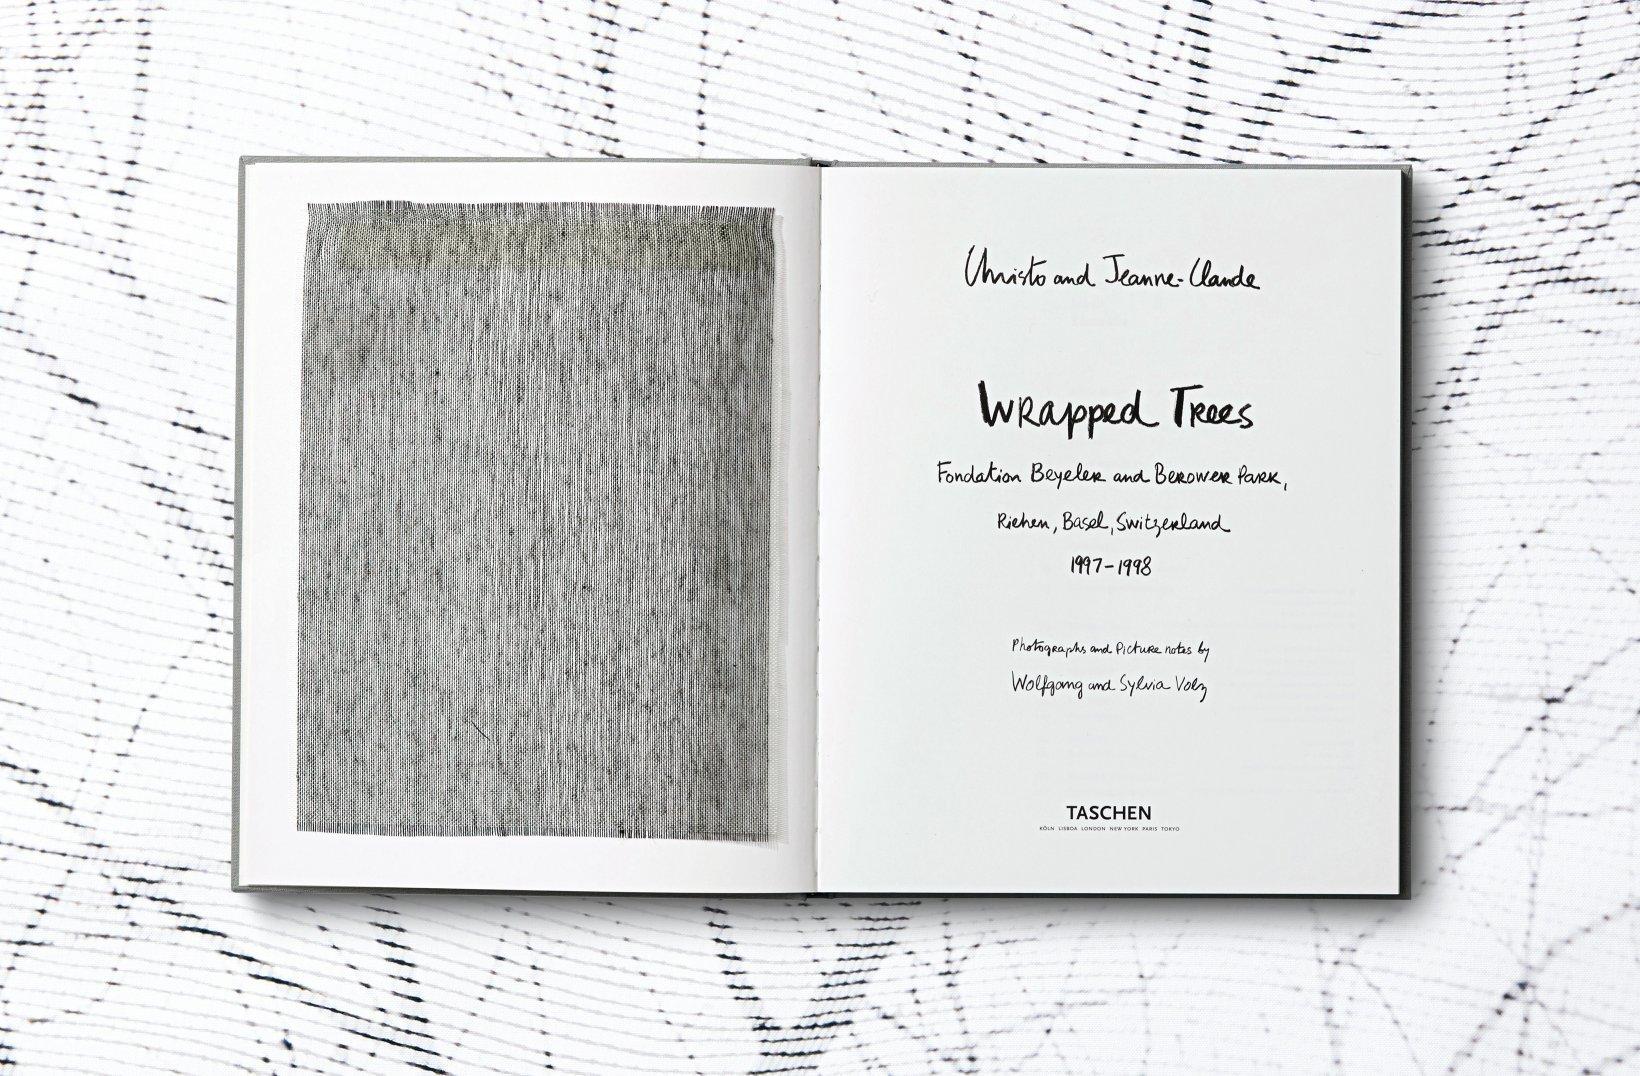 Christo and Jeanne-Claude. Wrapped Trees. Basel 1997–1998. Signed Book & Print For Sale 2